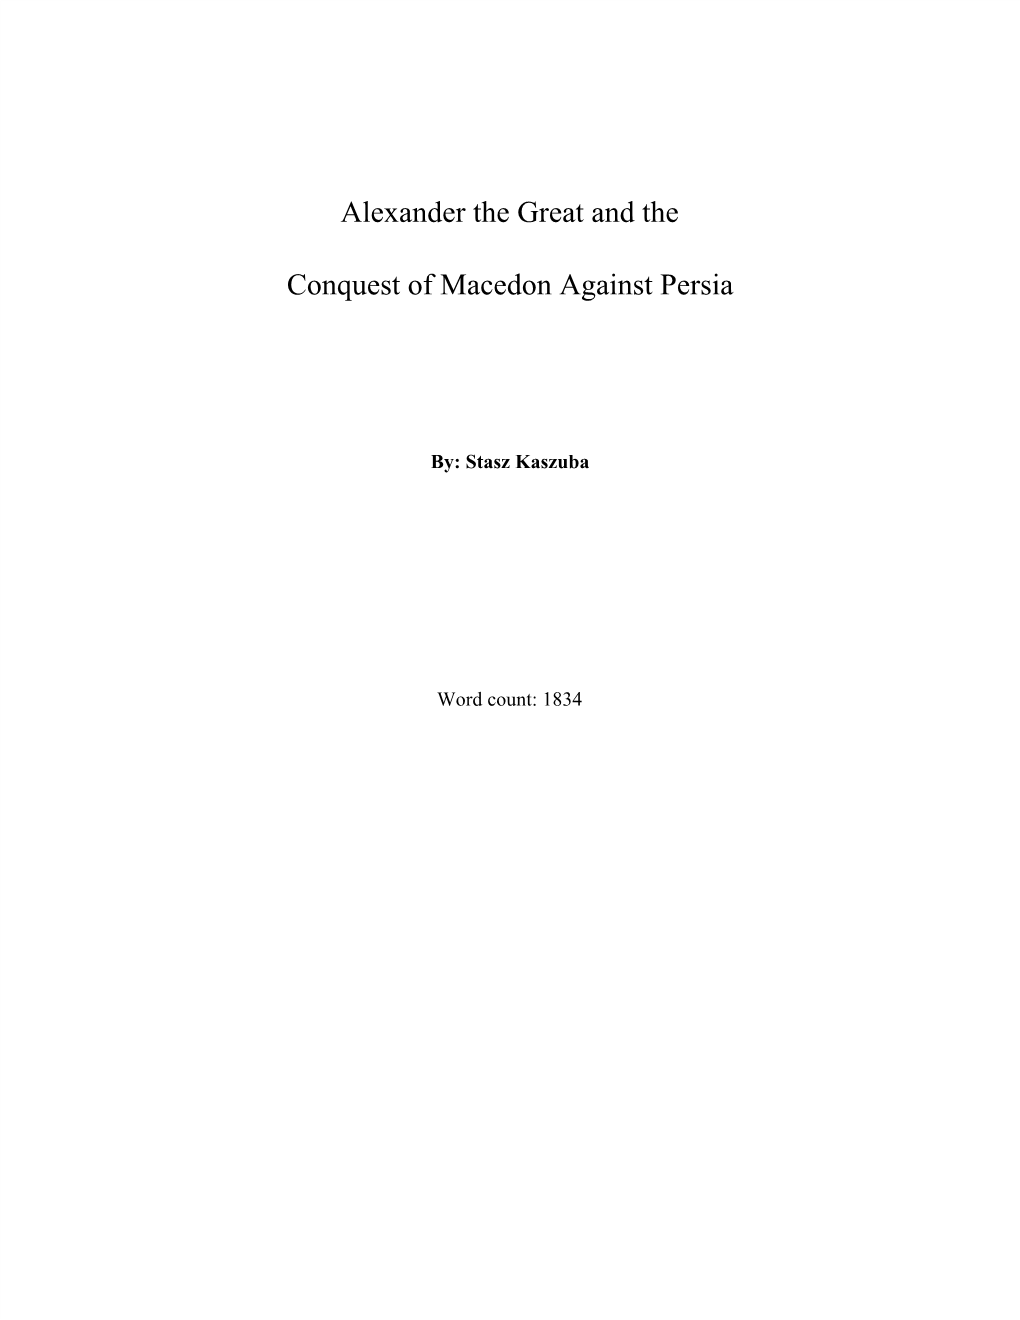 Alexander the Great and the Conquest of Macedon Against Persia